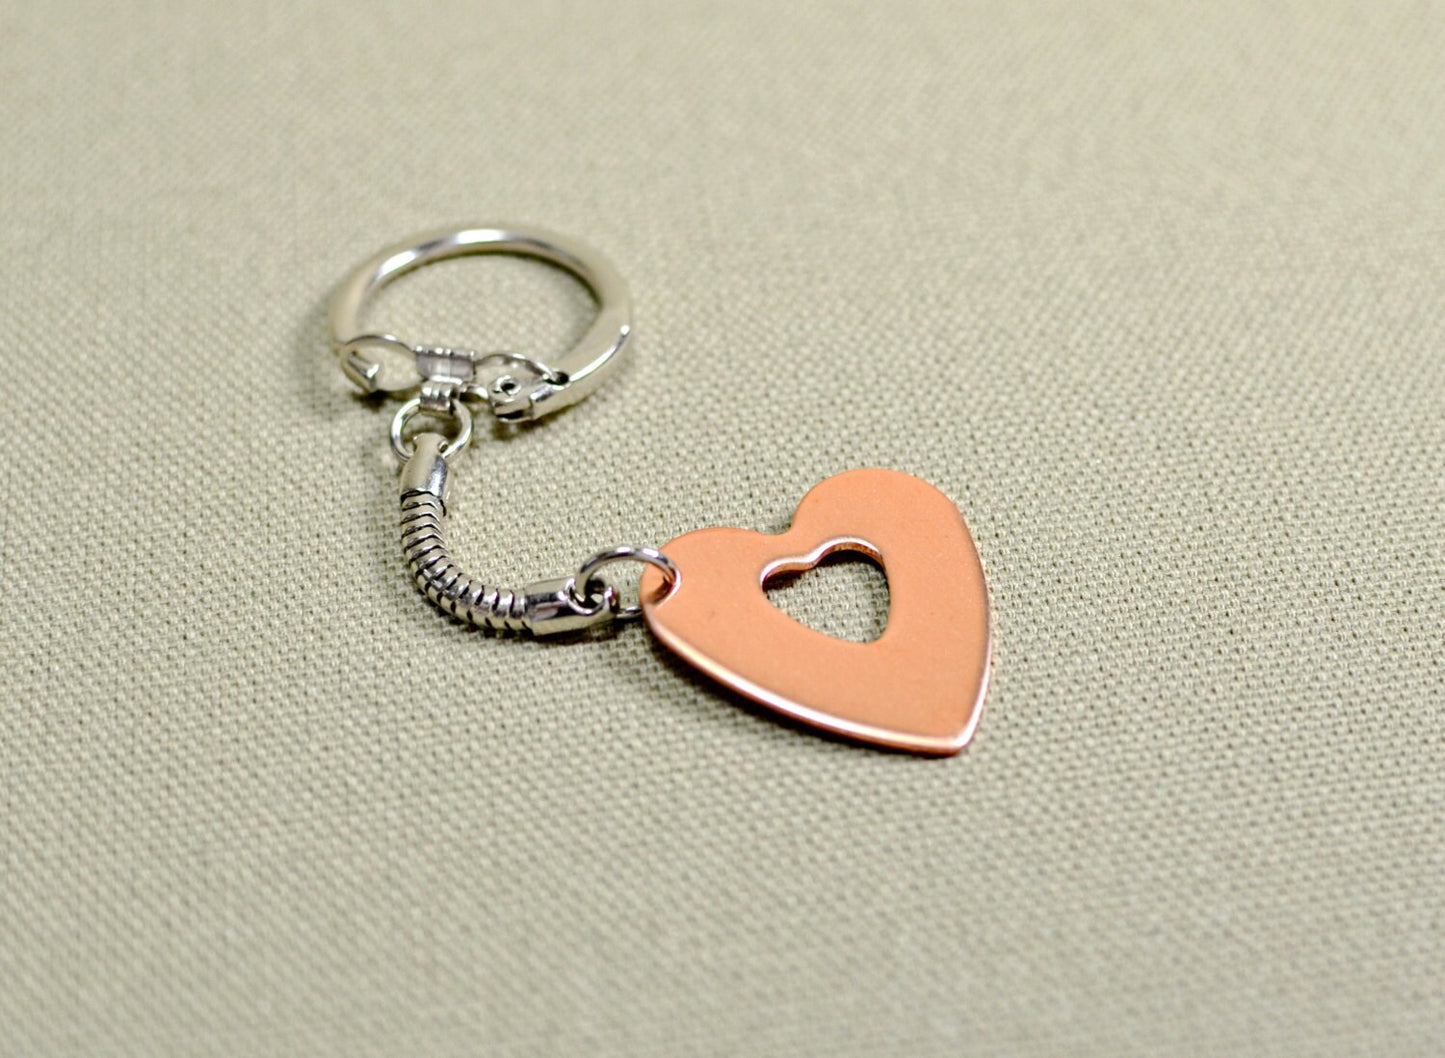 Copper heart key chain for personalized handstamping requests